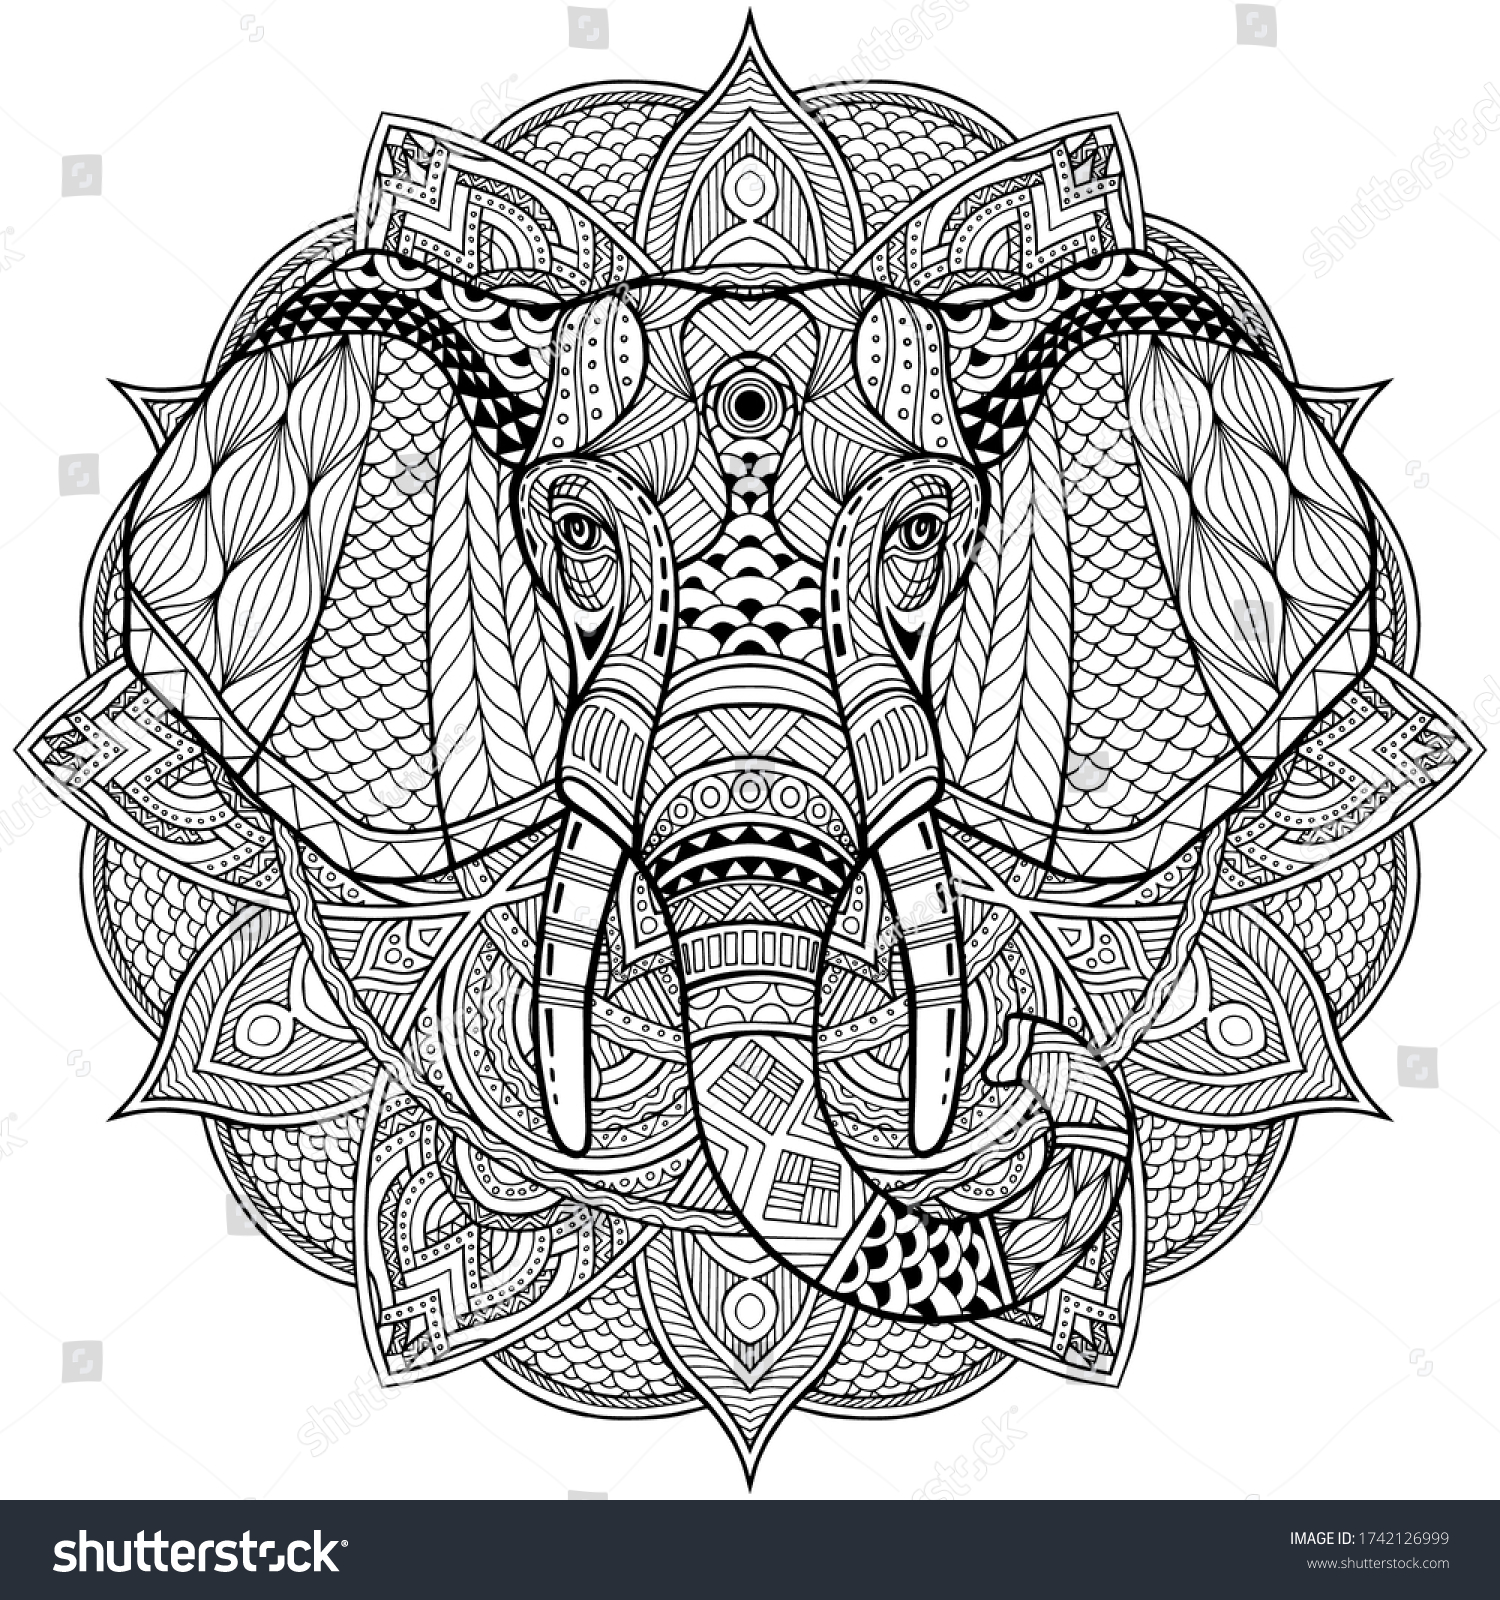 SVG of Elephant. Coloring is hand-drawn in the style of Zentangle, Doodle. Full face illustration animal's head black lines on a white background. Ethnic ornaments Indian, Mexican. Vector abstract background svg